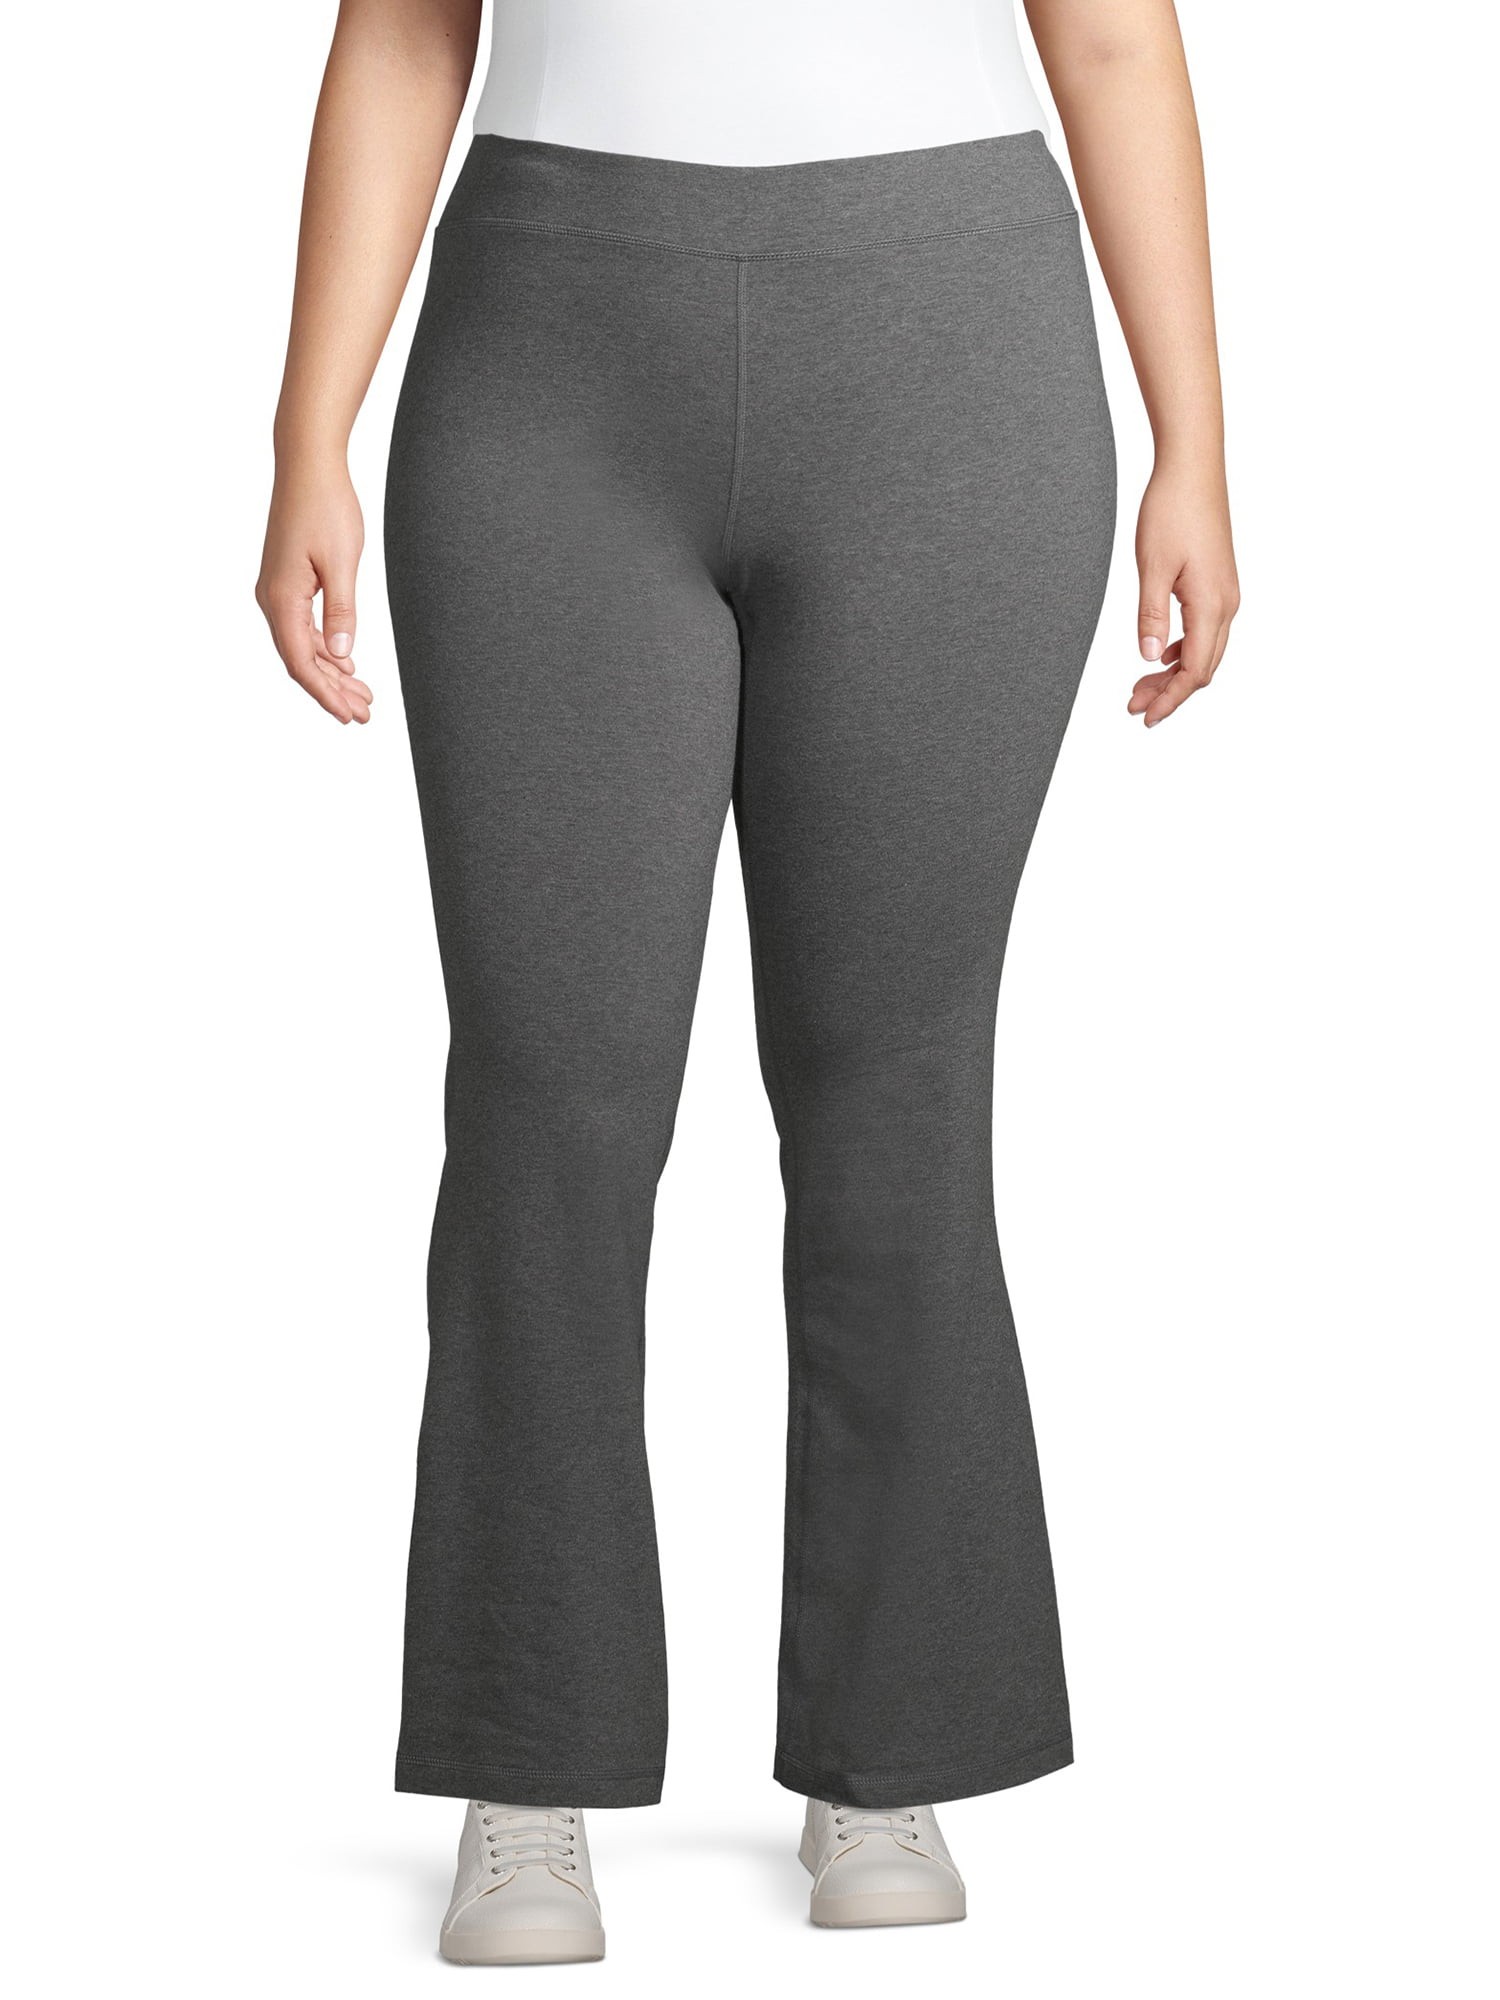 Athletic Works Women's Fleece Pants with Pockets, Sizes XS-3XL 